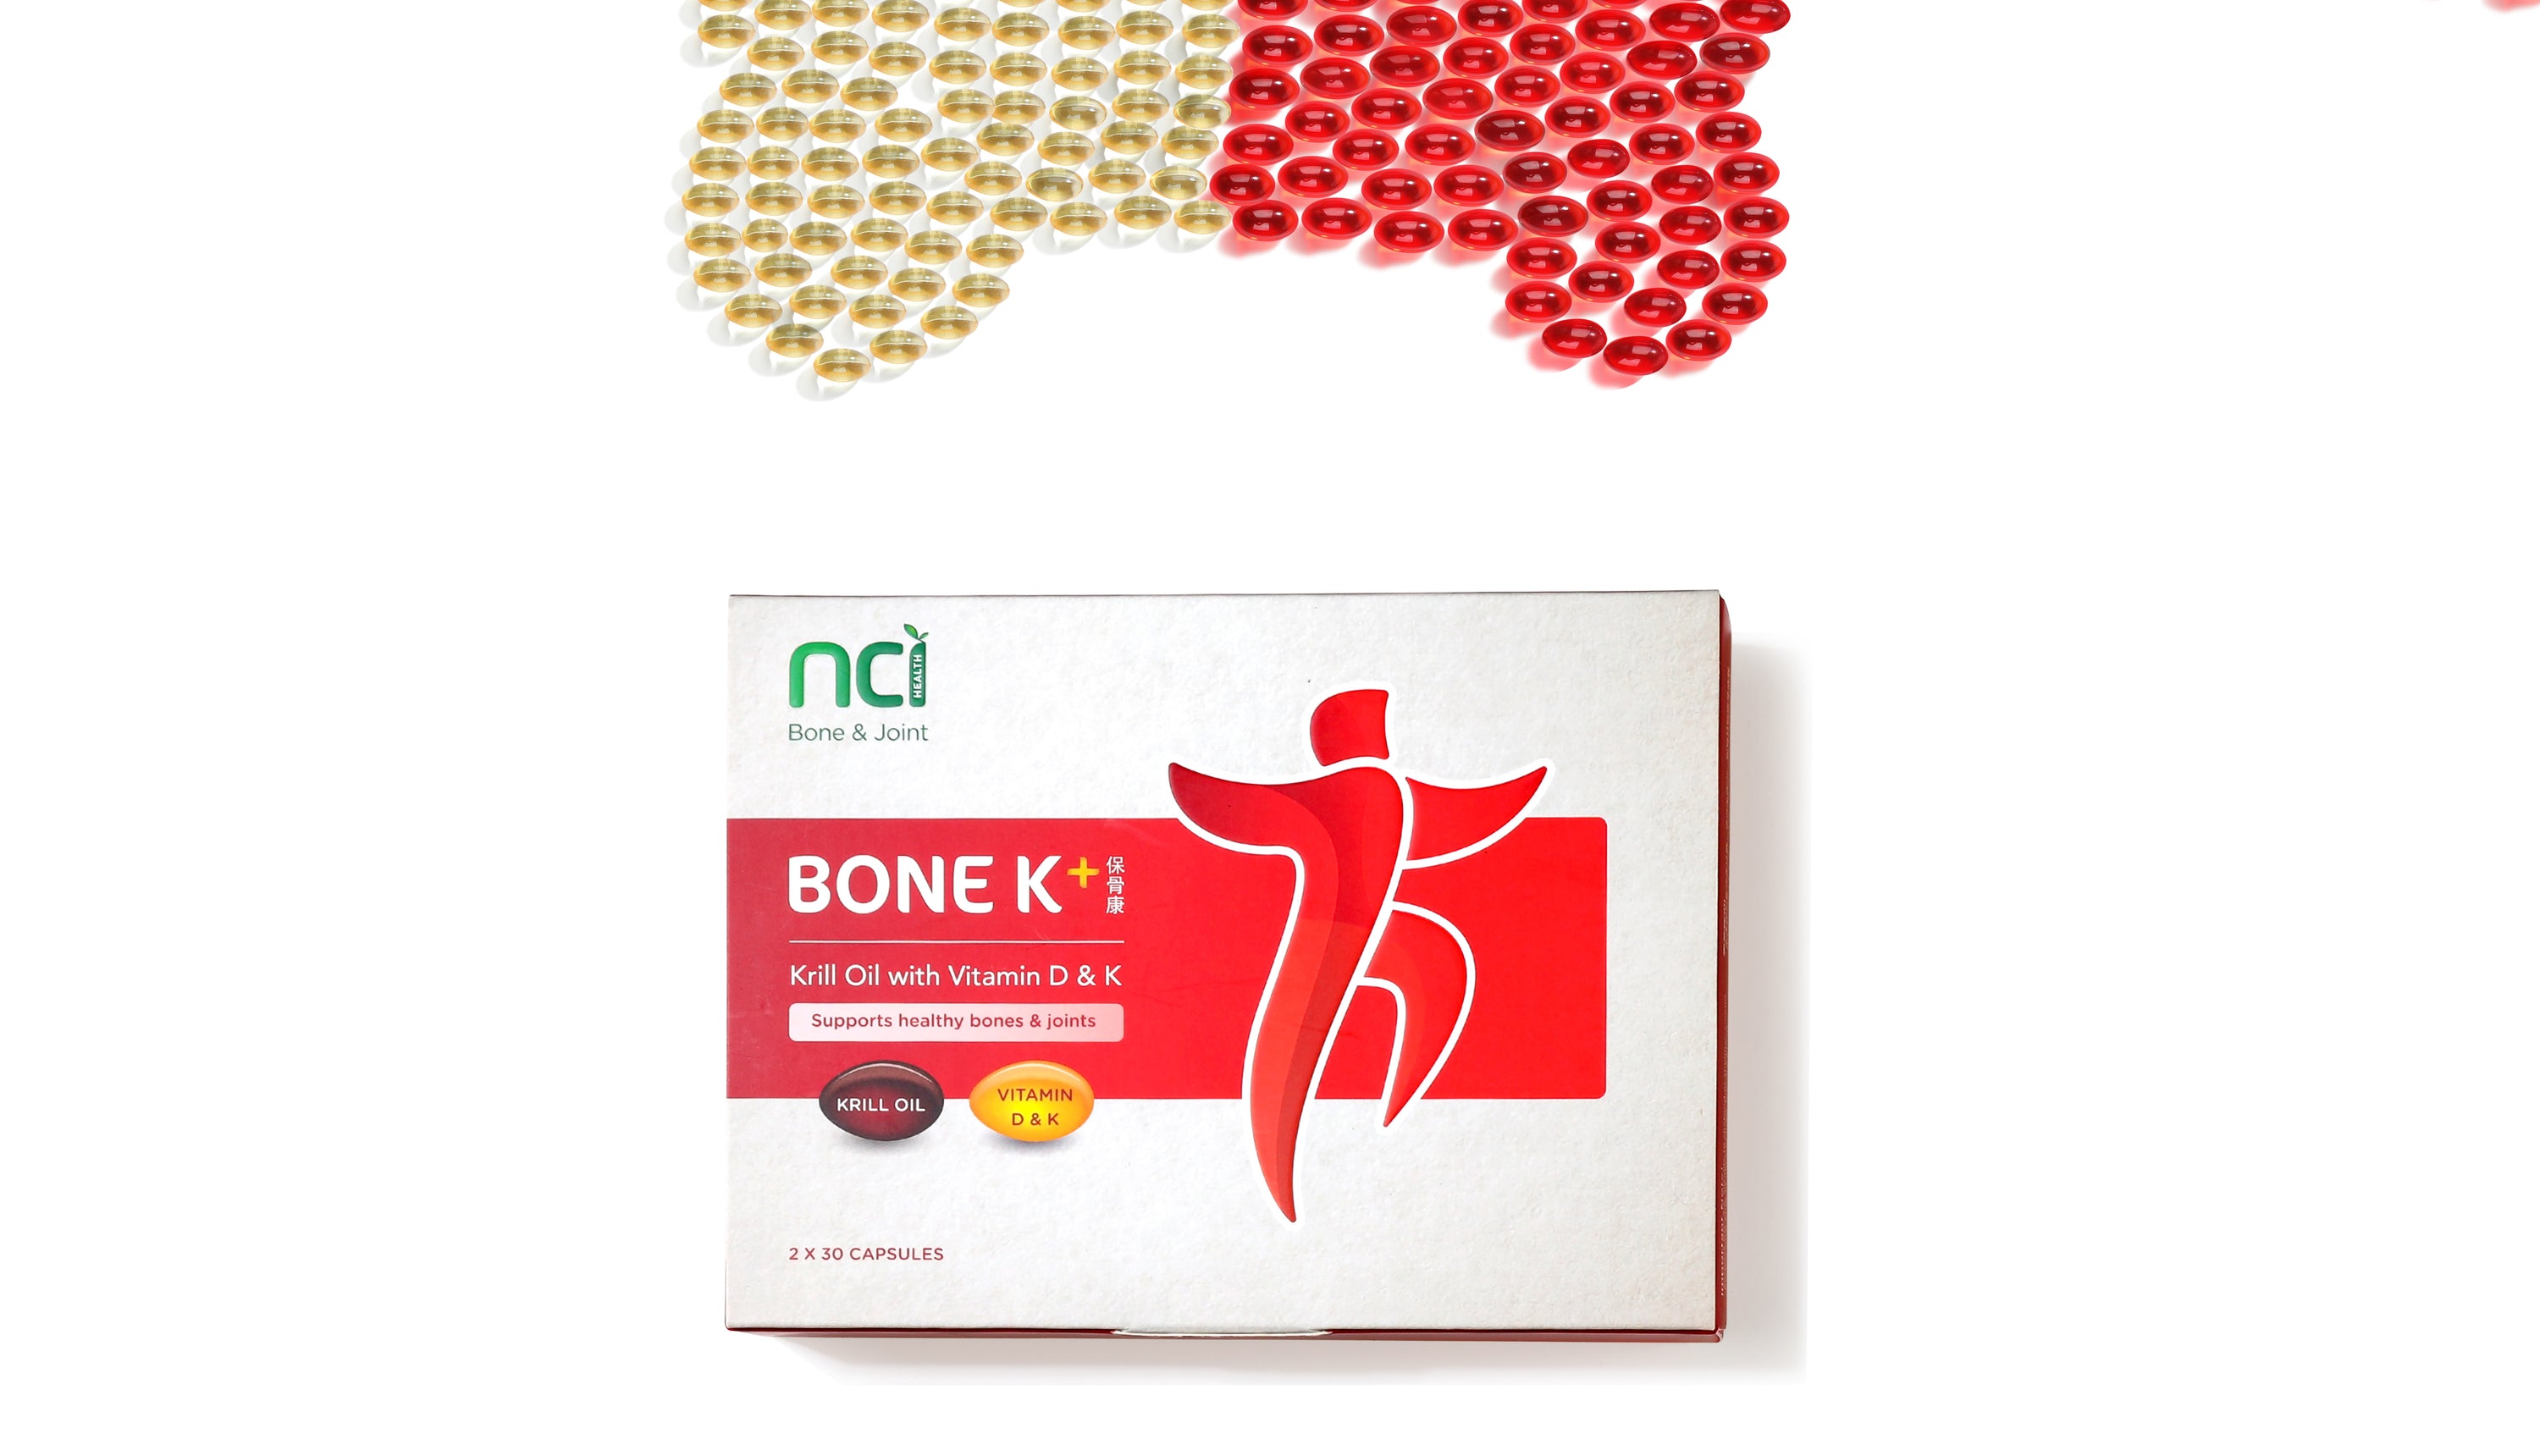 [Hello Bone K+®]- Why is Vitamin K and D important?